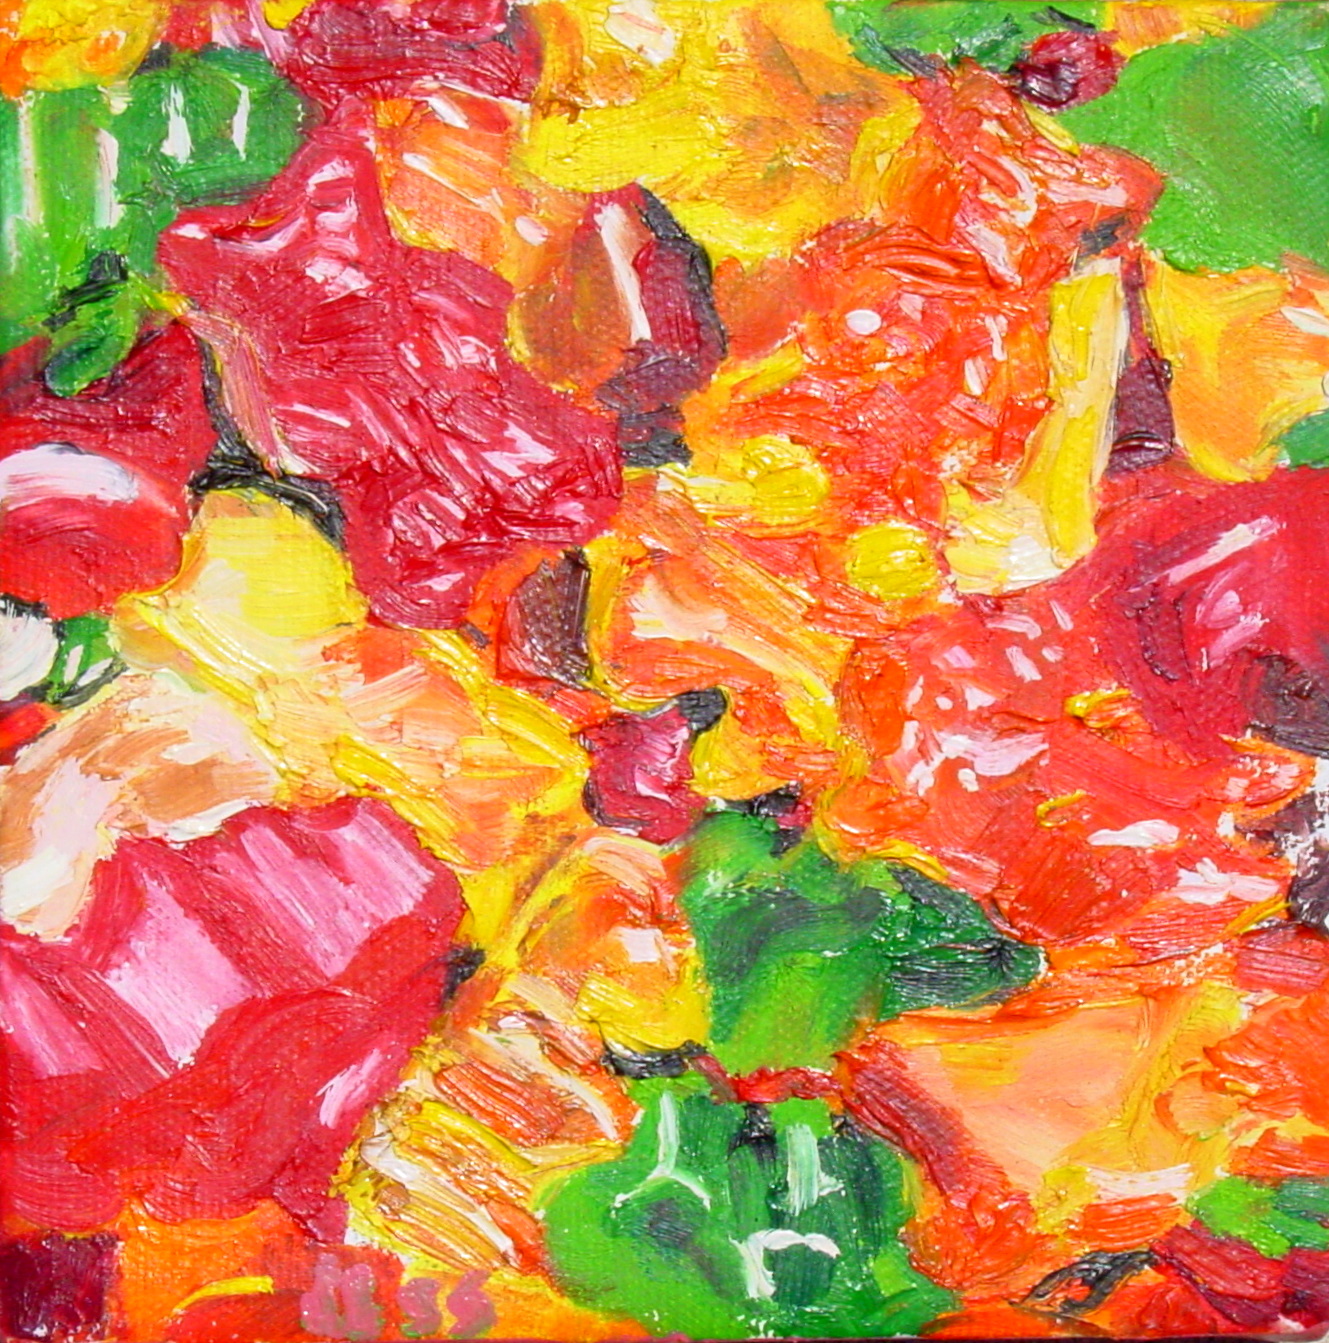 Yum Four Delicious Oil Paintings 6x6'' Jessica Siemens 2009